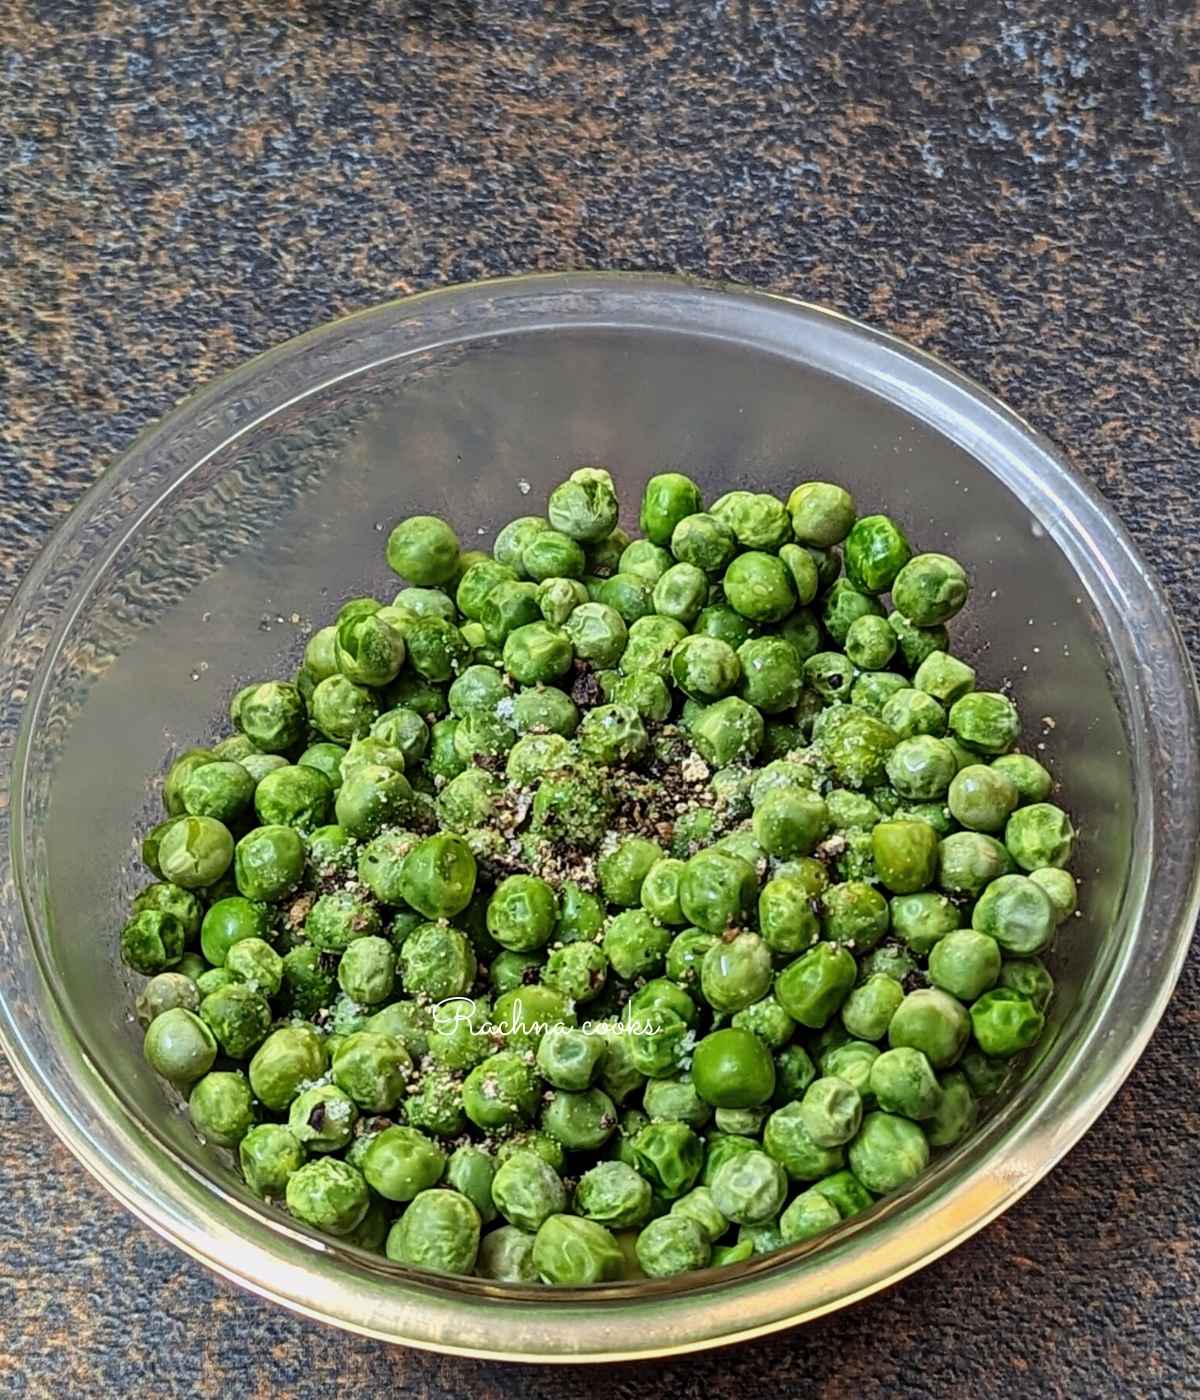 thawed peas tossed with salt, pepper and olive oil.